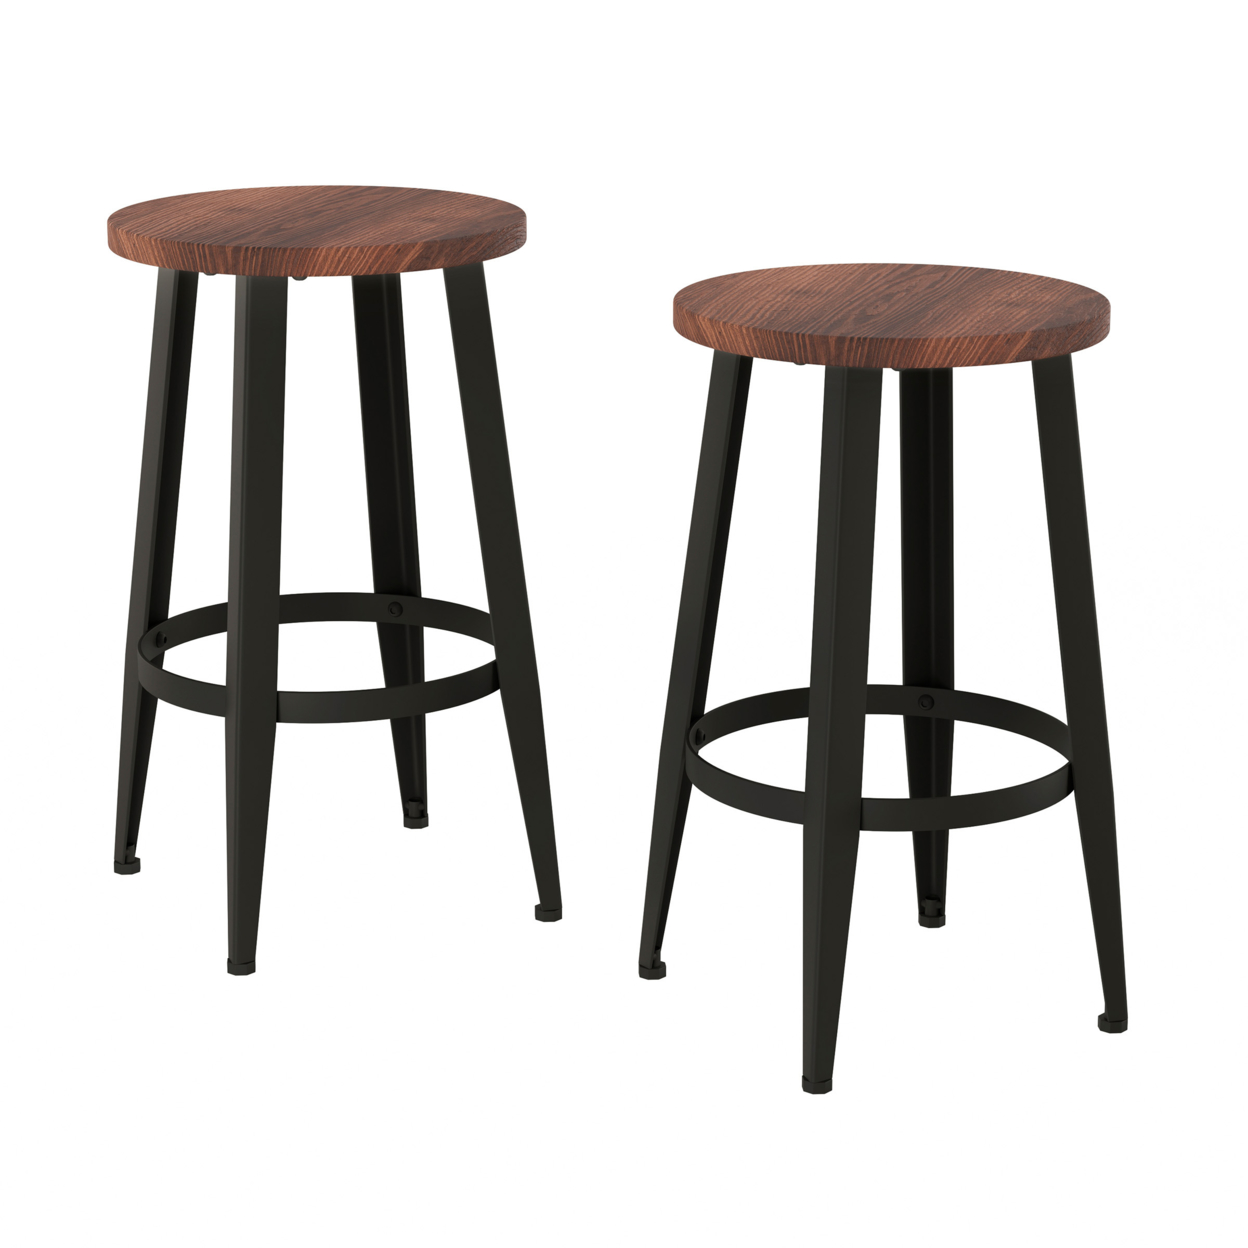 Set Of 2 Counter Height Stools Wood Seat Metal Iron Legs 24 In Kitchen Seating